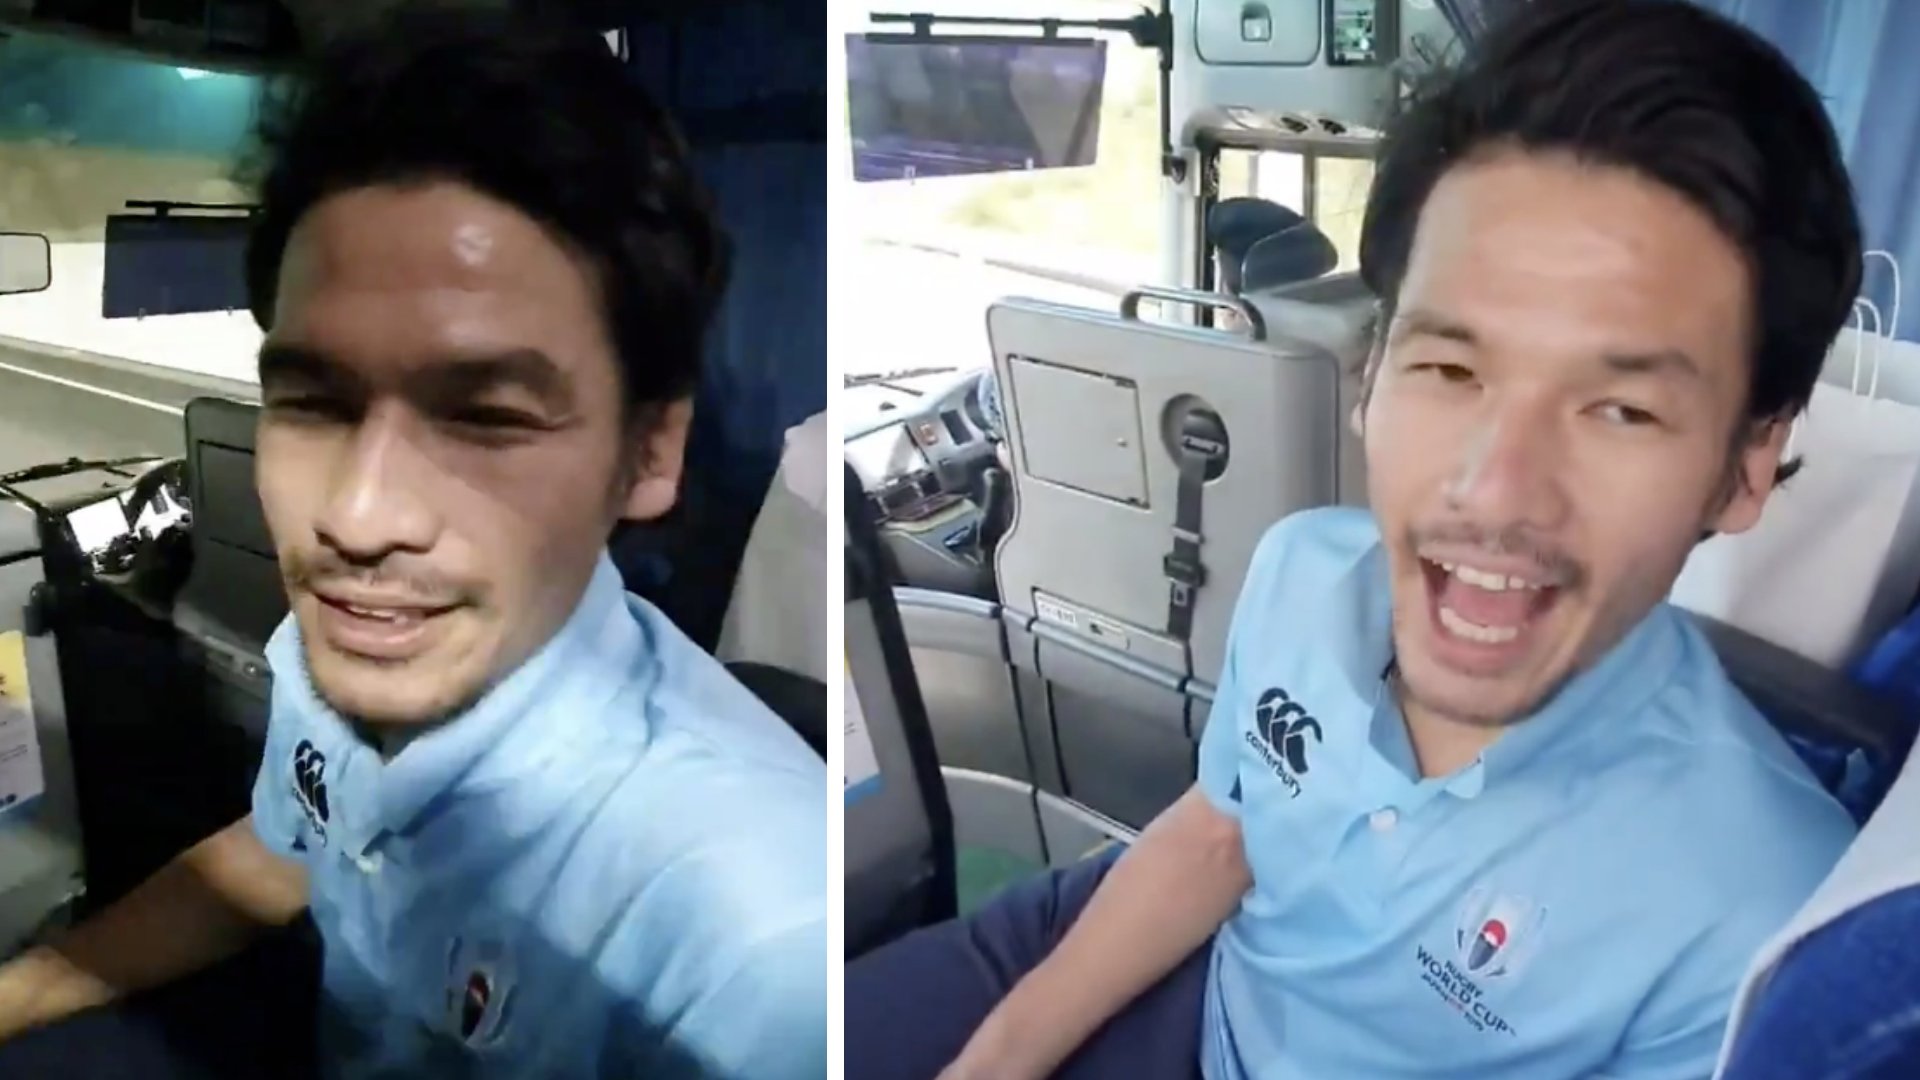 Painfully funny video emerges online of Scottish rugby team making Japanese man attempt Scottish slang